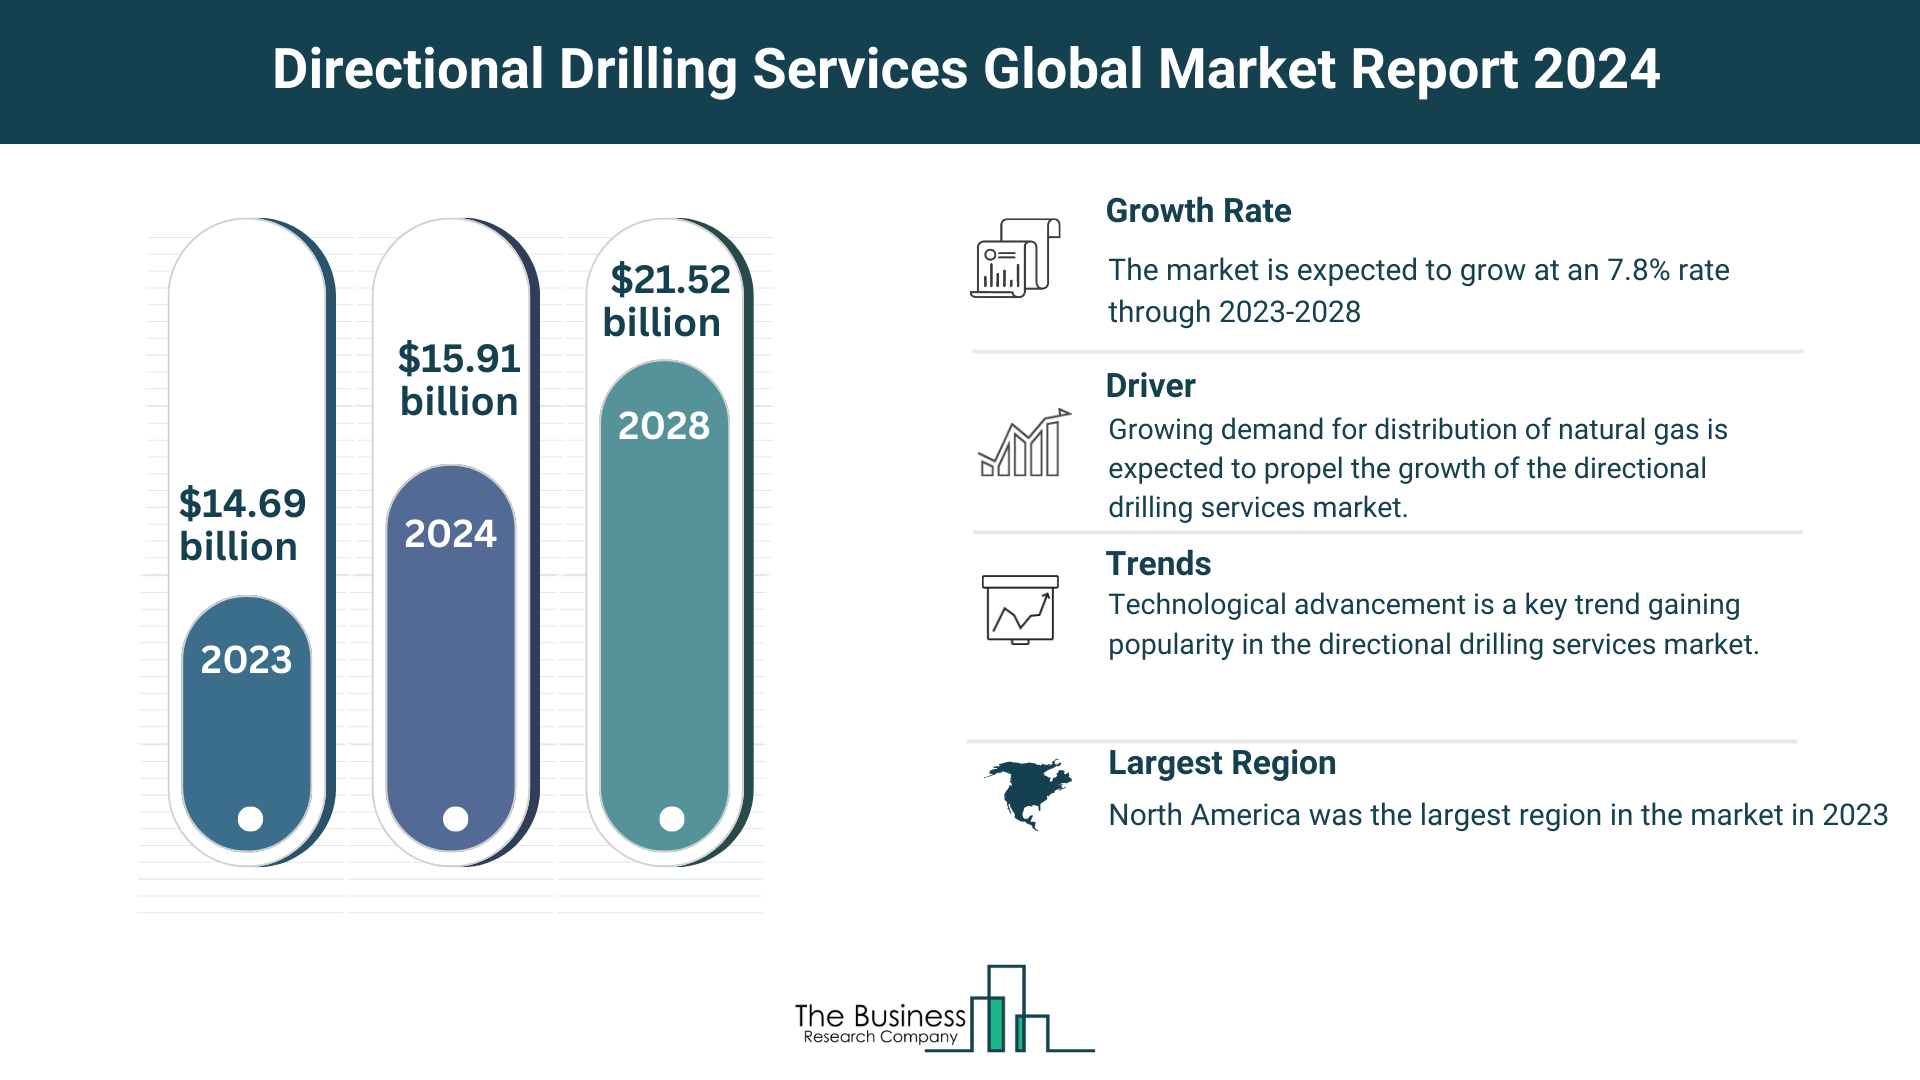 Global Directional Drilling Services Market